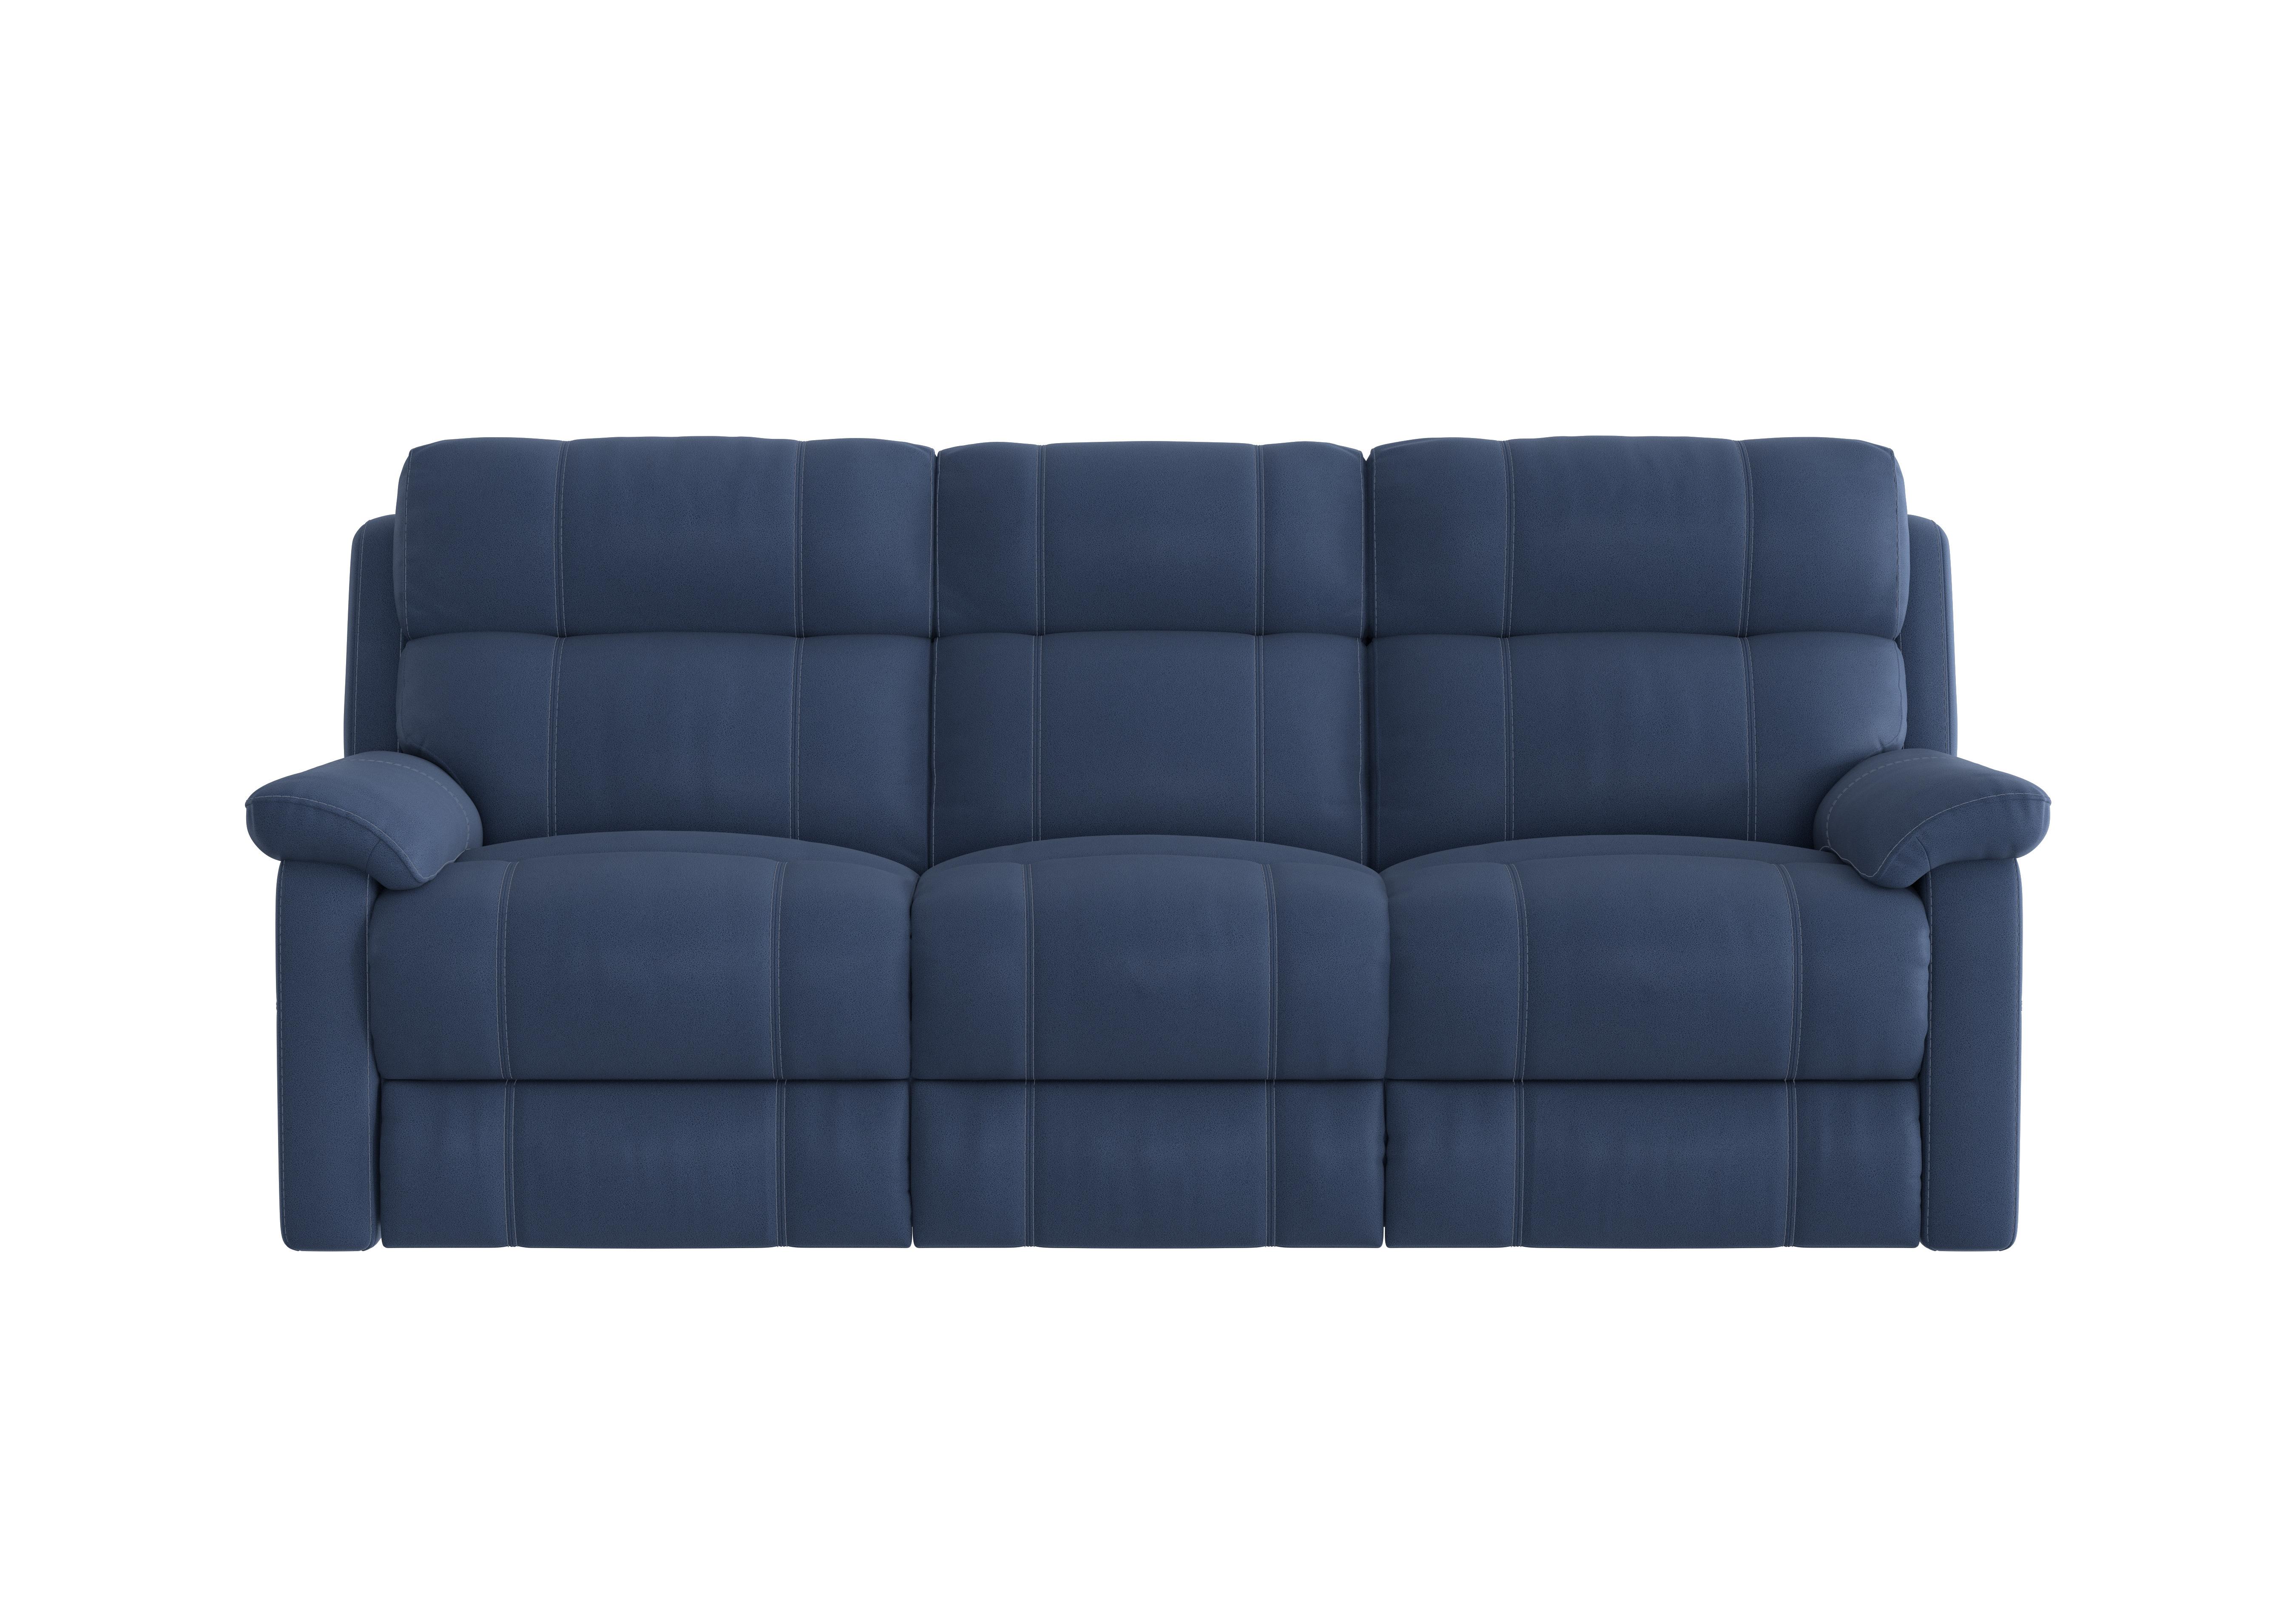 Relax Station Komodo 3 Seater Fabric Recliner Sofa with Power Headrests and Cup Holders in Bfa-Blj-R10 Blue on Furniture Village